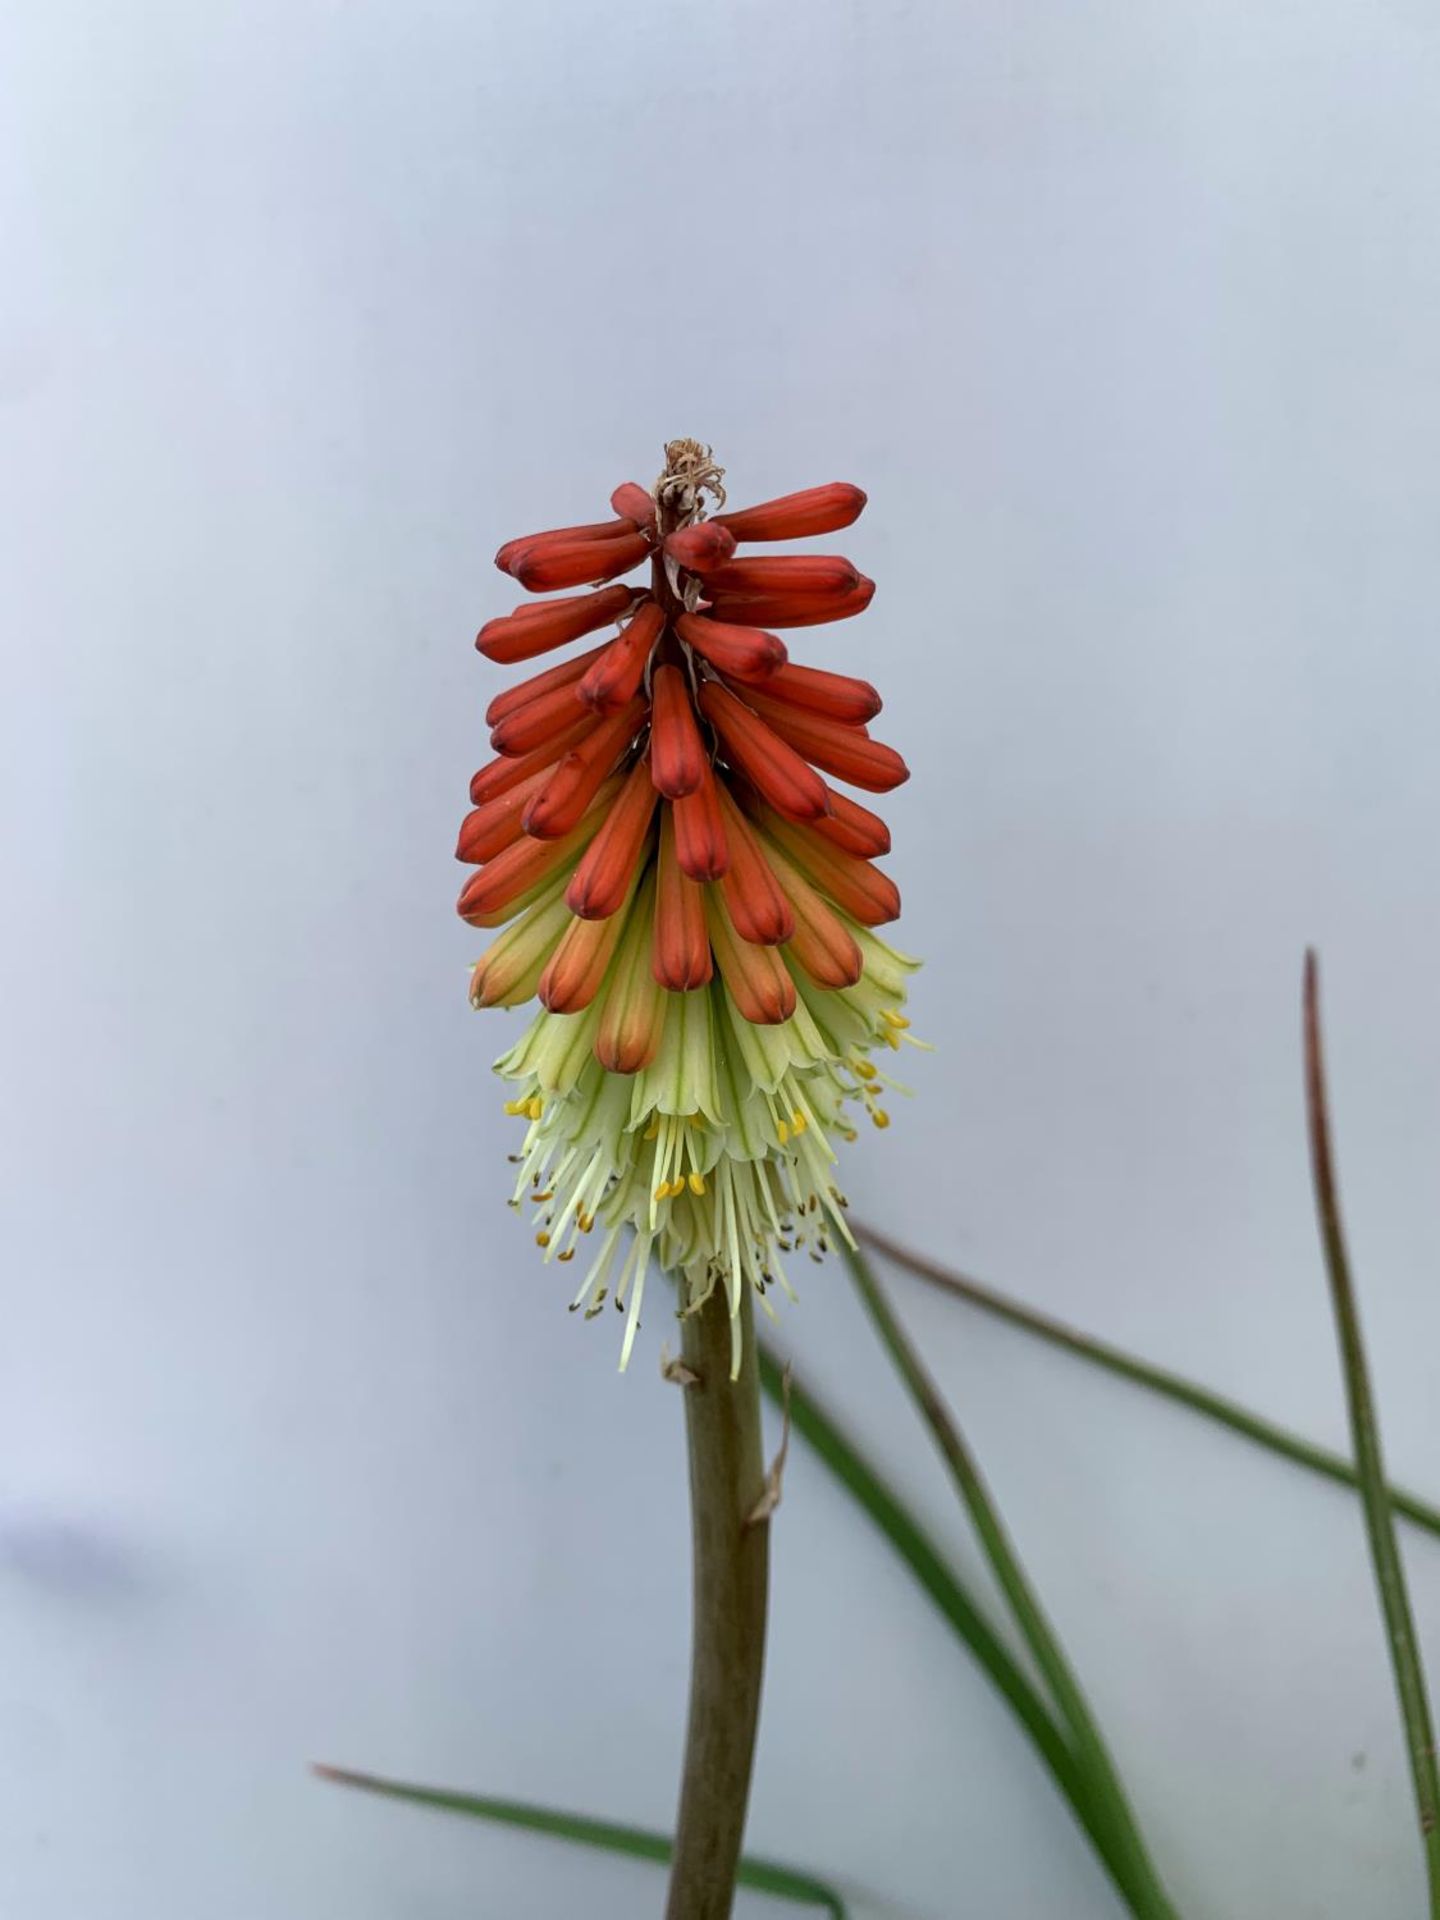 FOUR KNIPHOFIA RED HOT POKER 'FLAMENCO' IN 2 LTR POTS APPROX 70CM IN HEIGHT PLUS VAT TO BE SOLD - Image 7 of 8